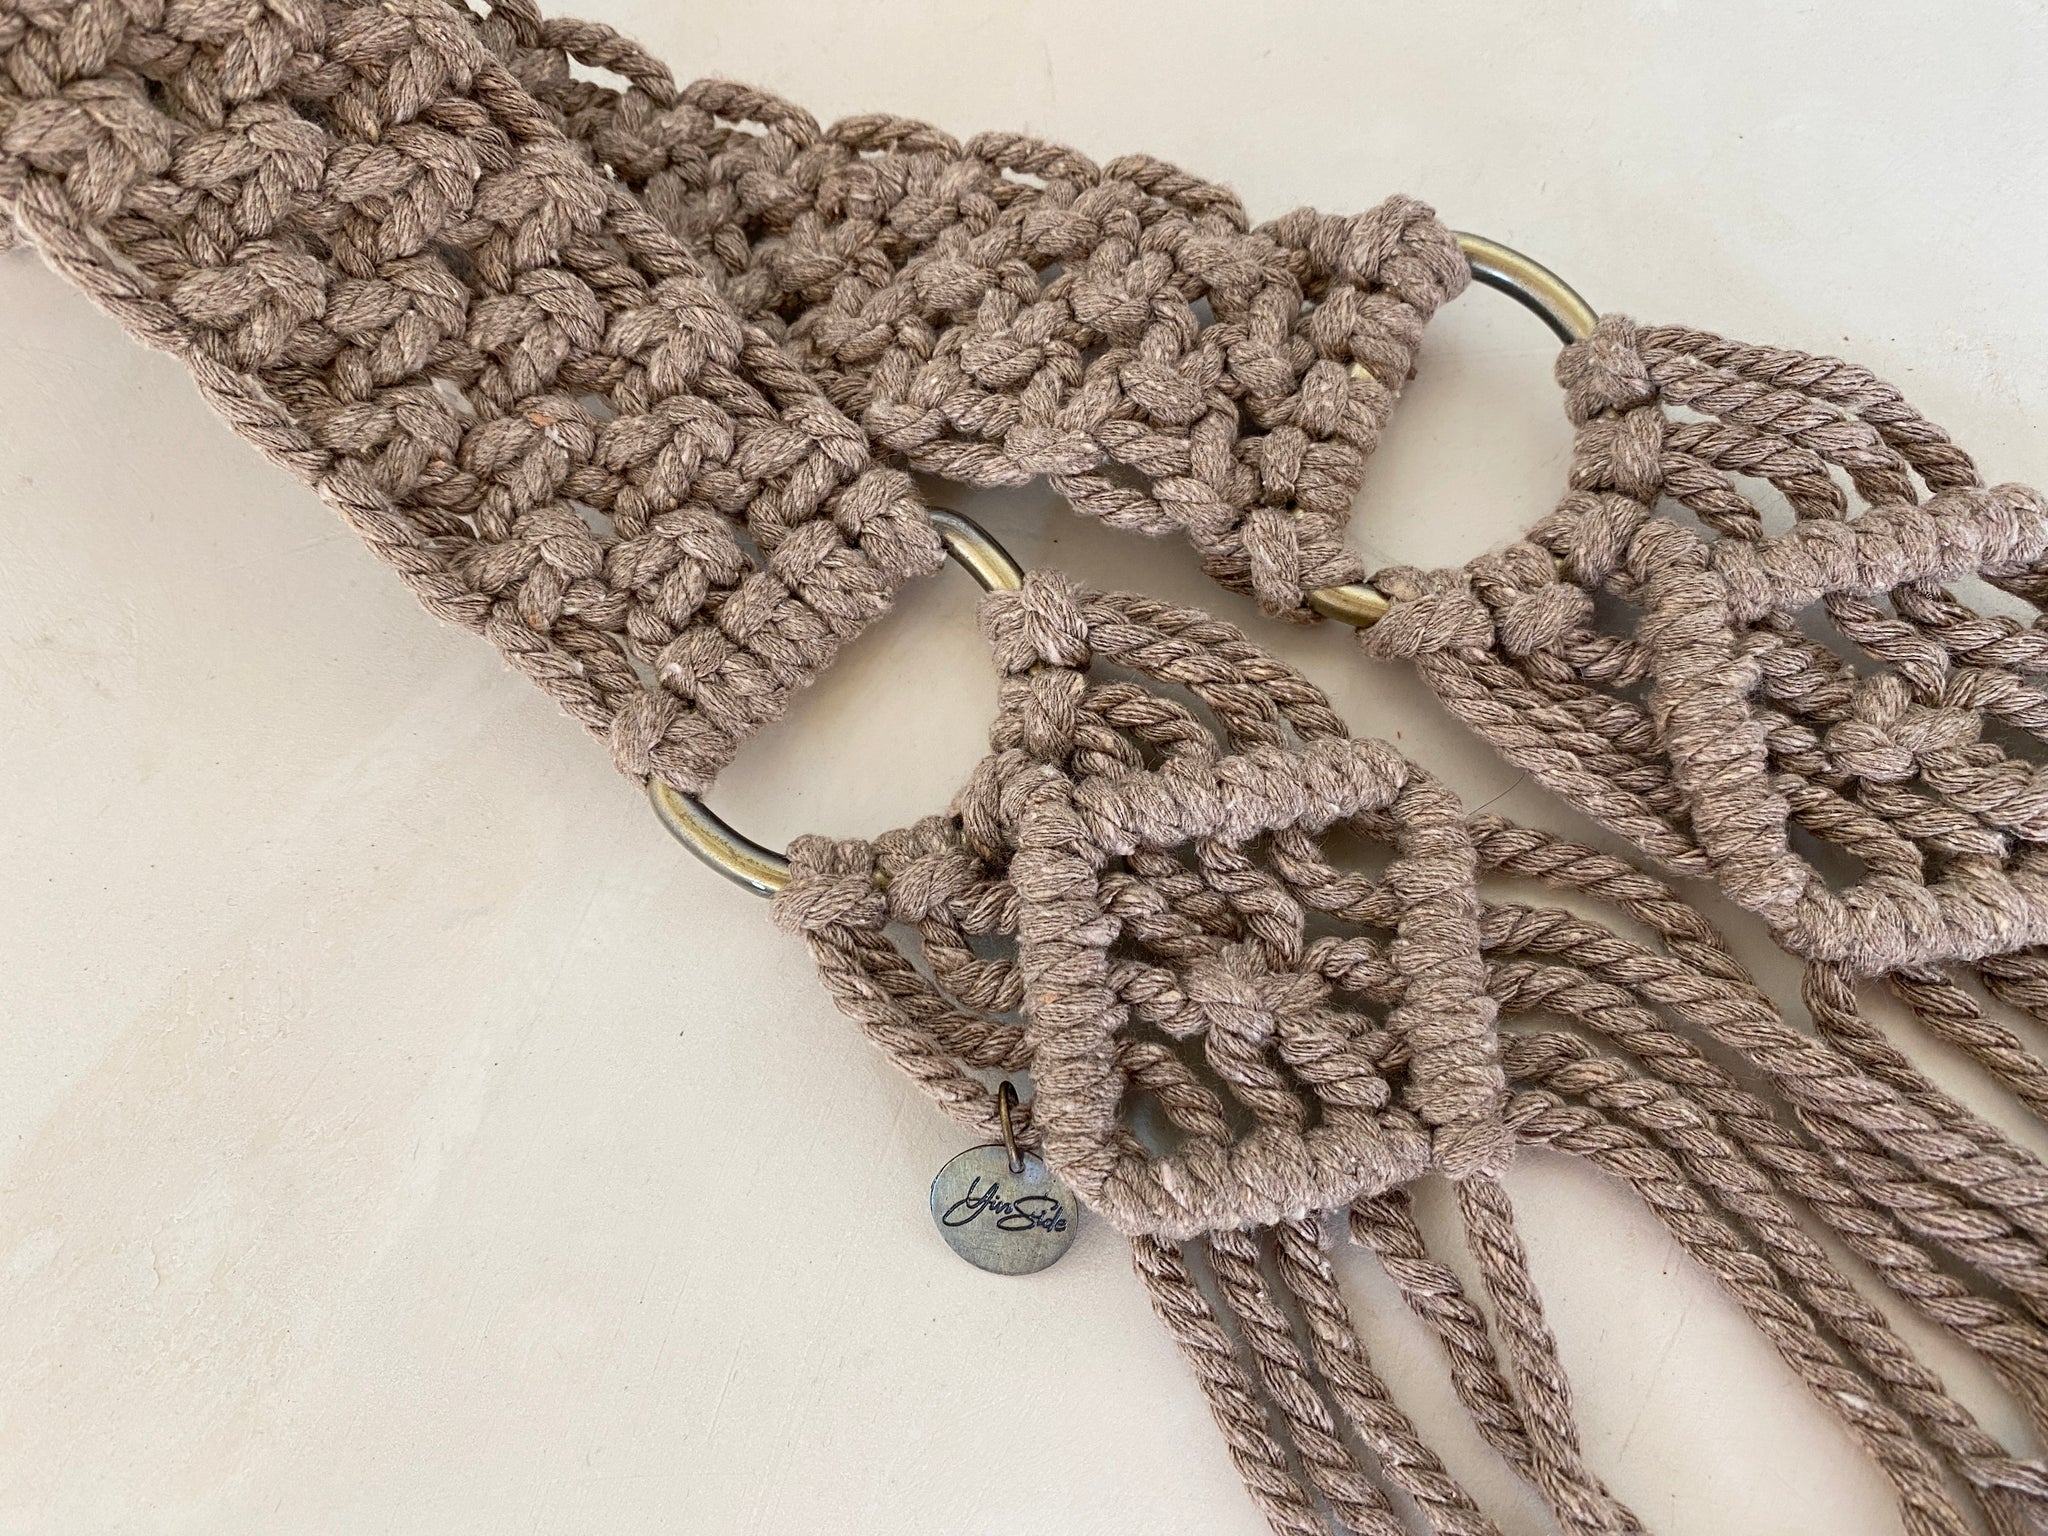 Macrame Yoga Mat Strap by Gracie Jay & Co – Gracie Jay and Co